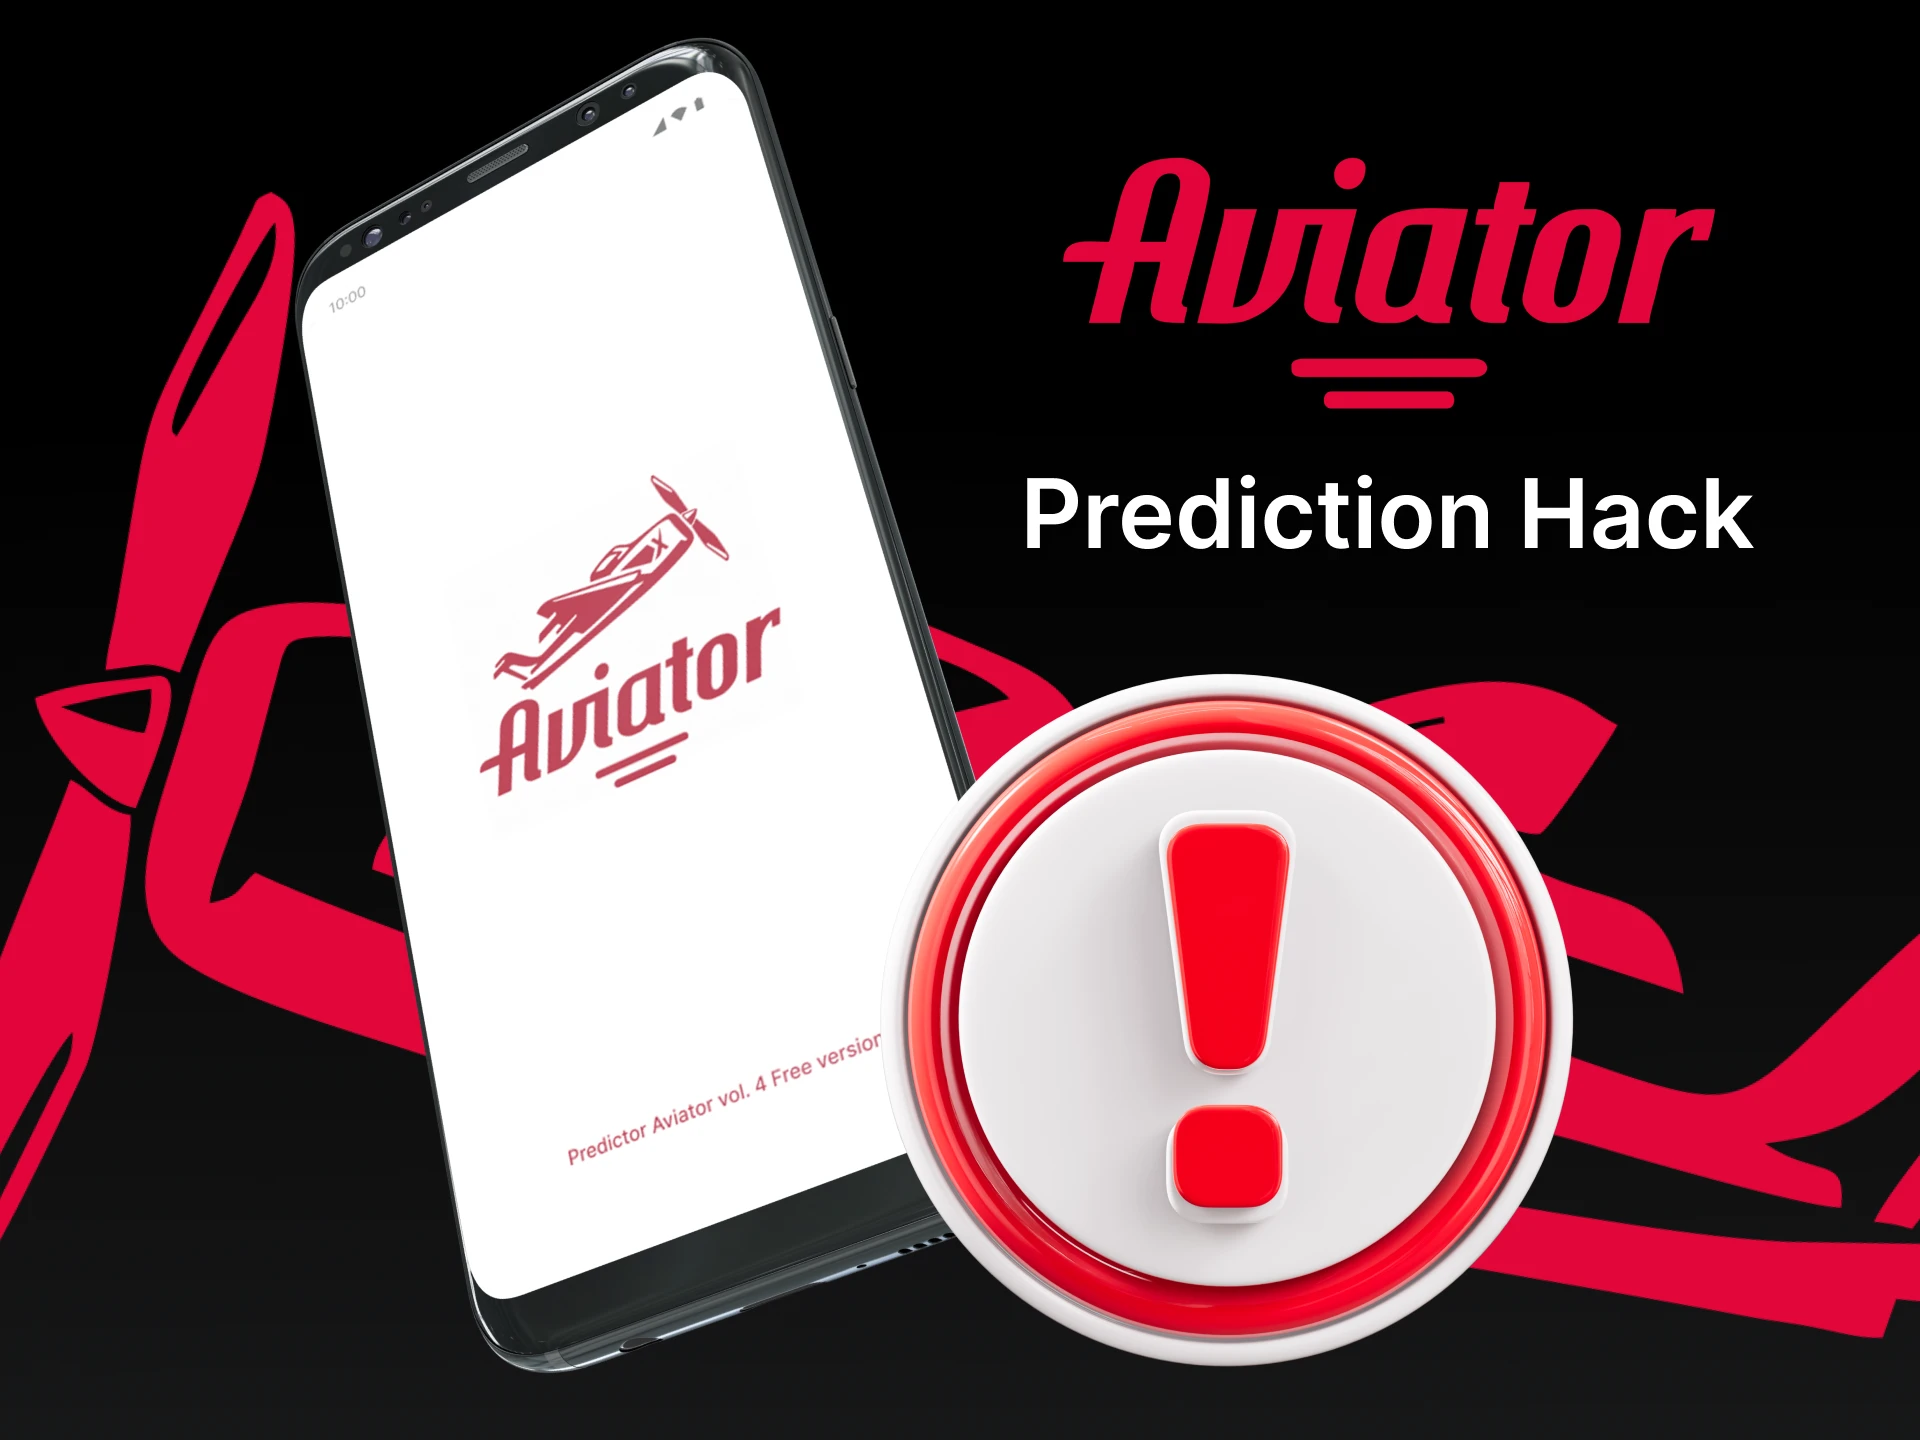 Find out if it's worth hacking the predictor.